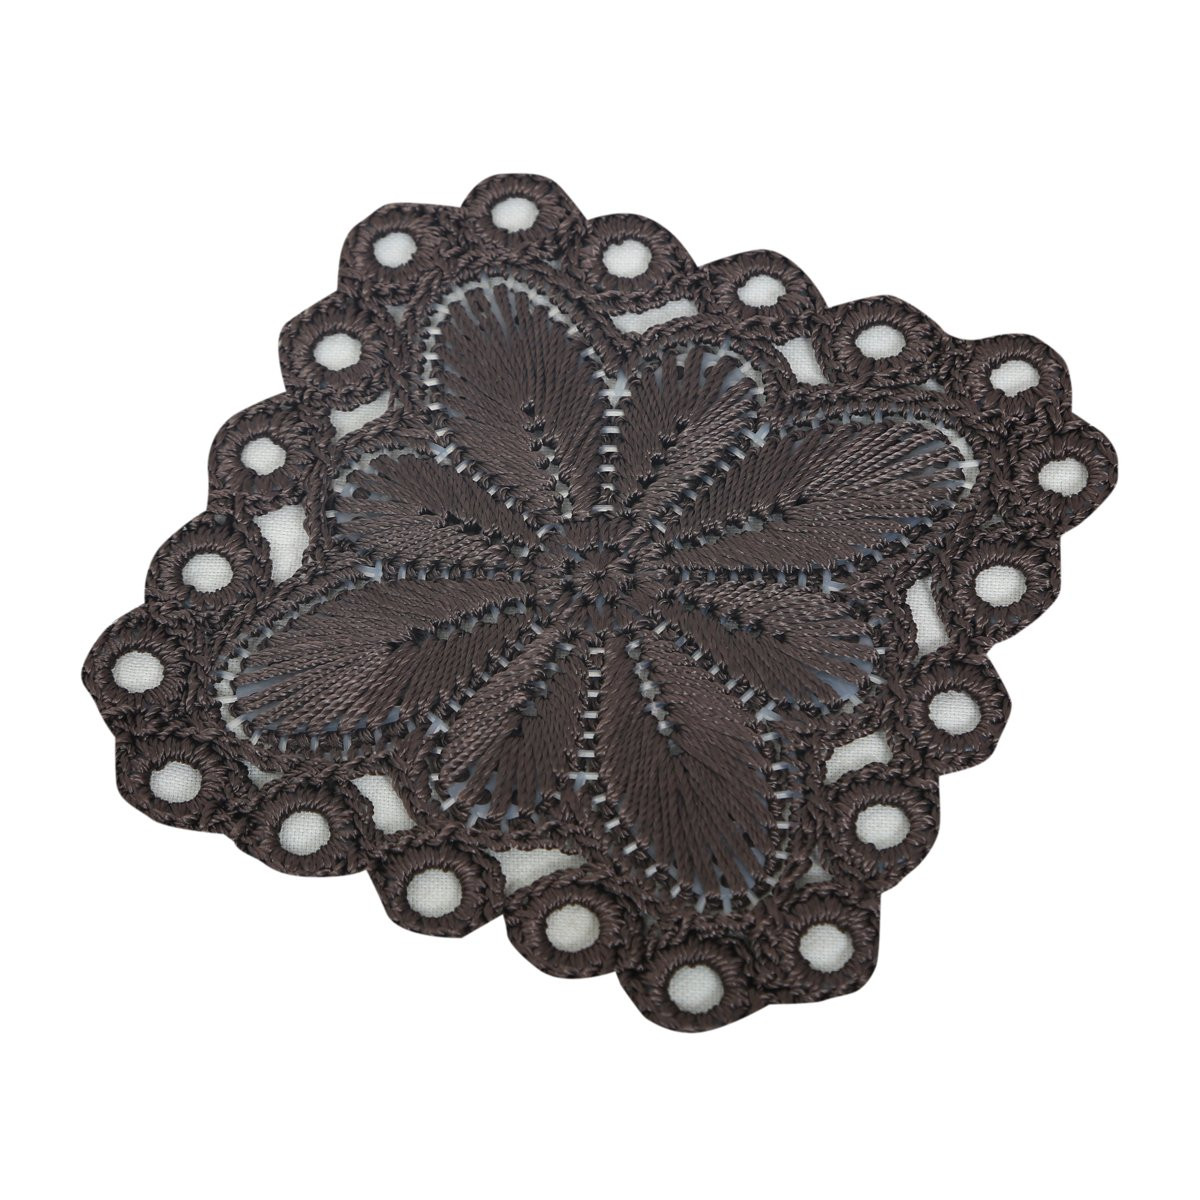 Kuber Industries Flower Design Handmade Square Cotton Coaster For Kinds of Mugs and Cups,(Brown & Cream)